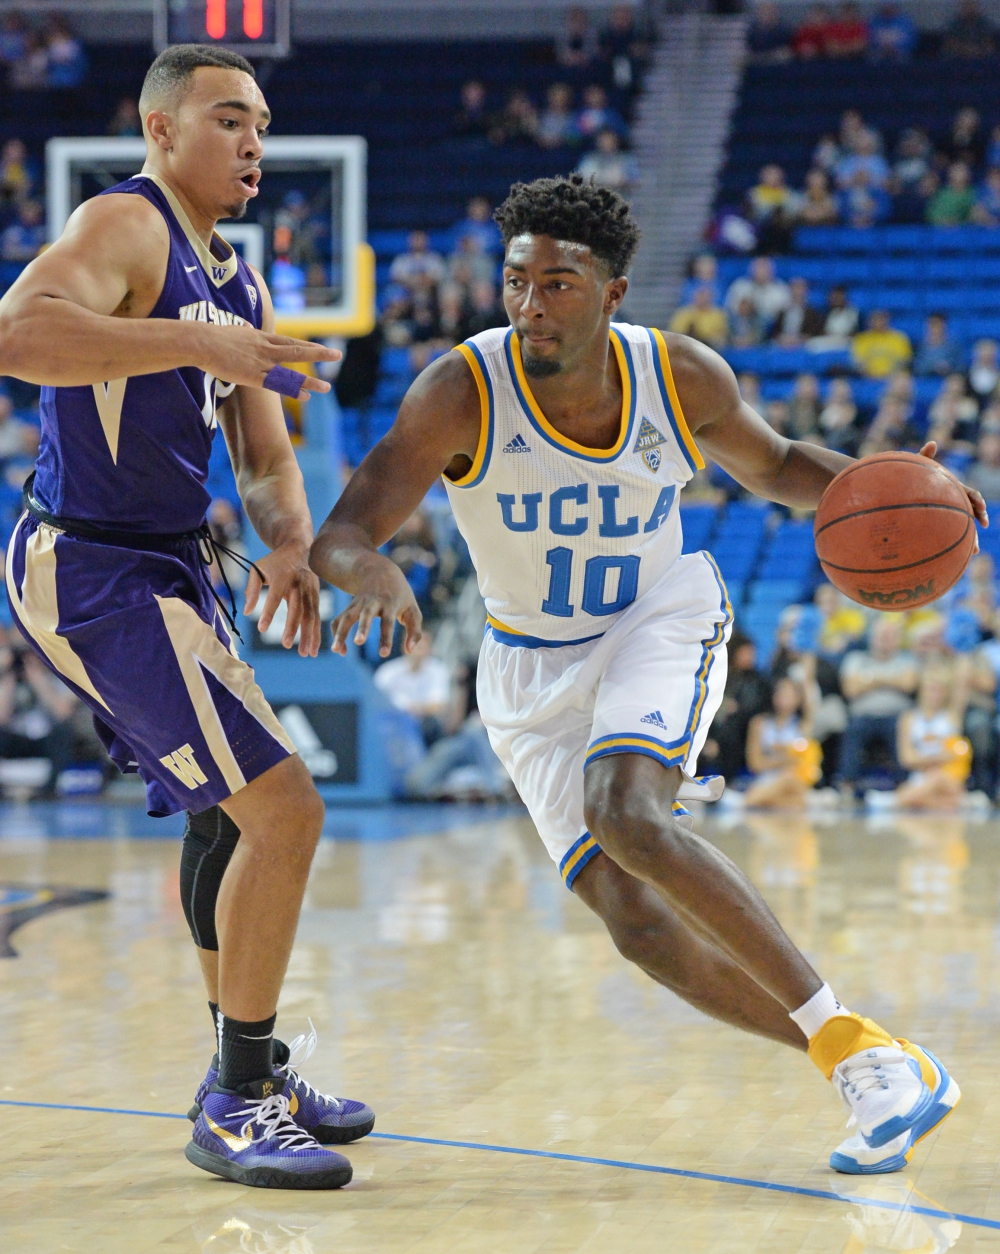 UCLA junior Isaac Hamilton earned an All-Pac-12 second-team nod on Monday. No Bruin made the first team for the first time since 2011-12. (Steve McCrank/Staff)